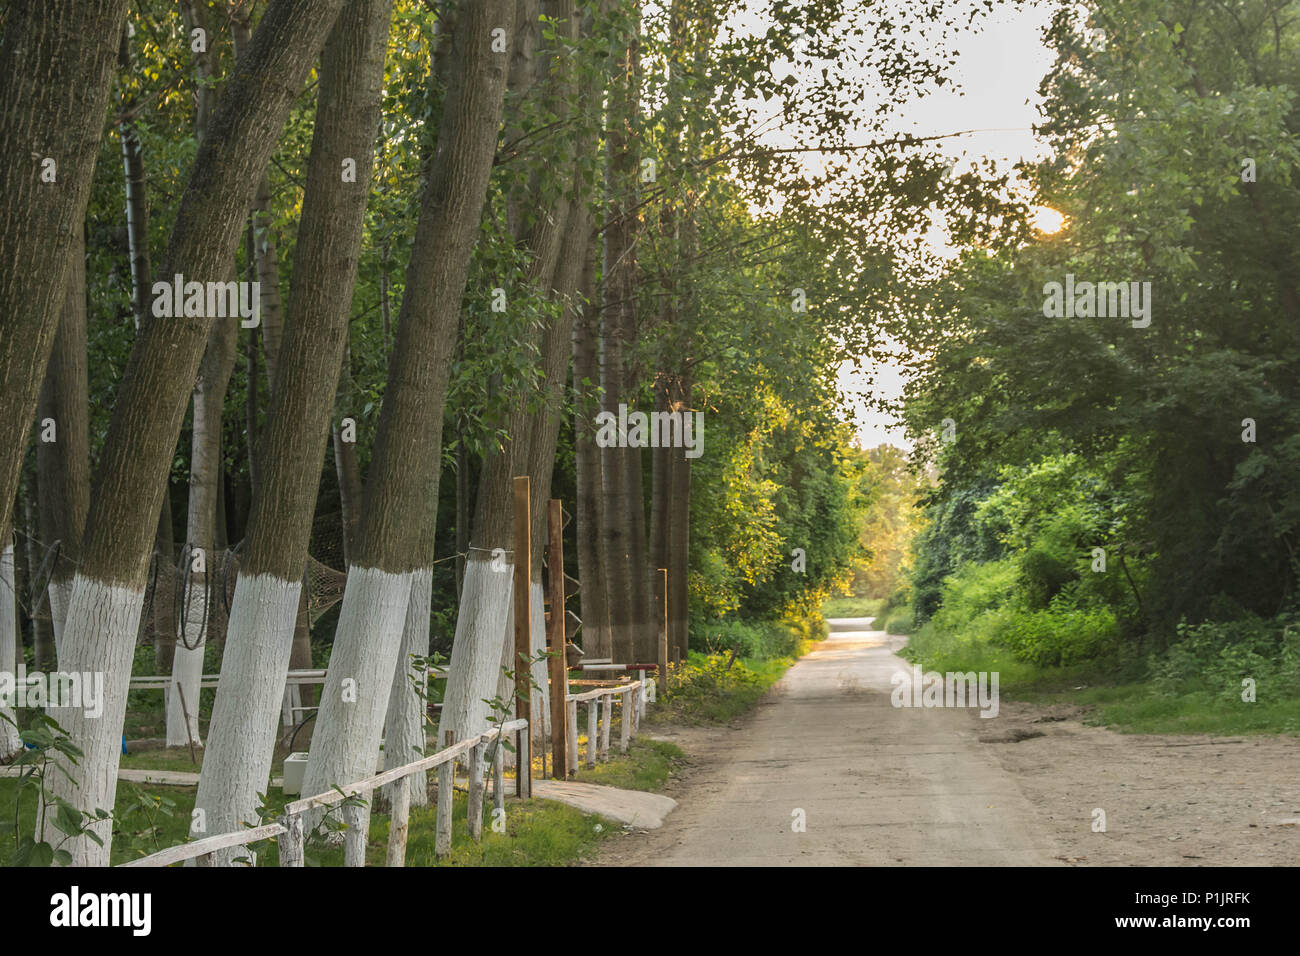 Path next to cottonwood whith trunk painted in white near Belgrade in Serbia Stock Photo